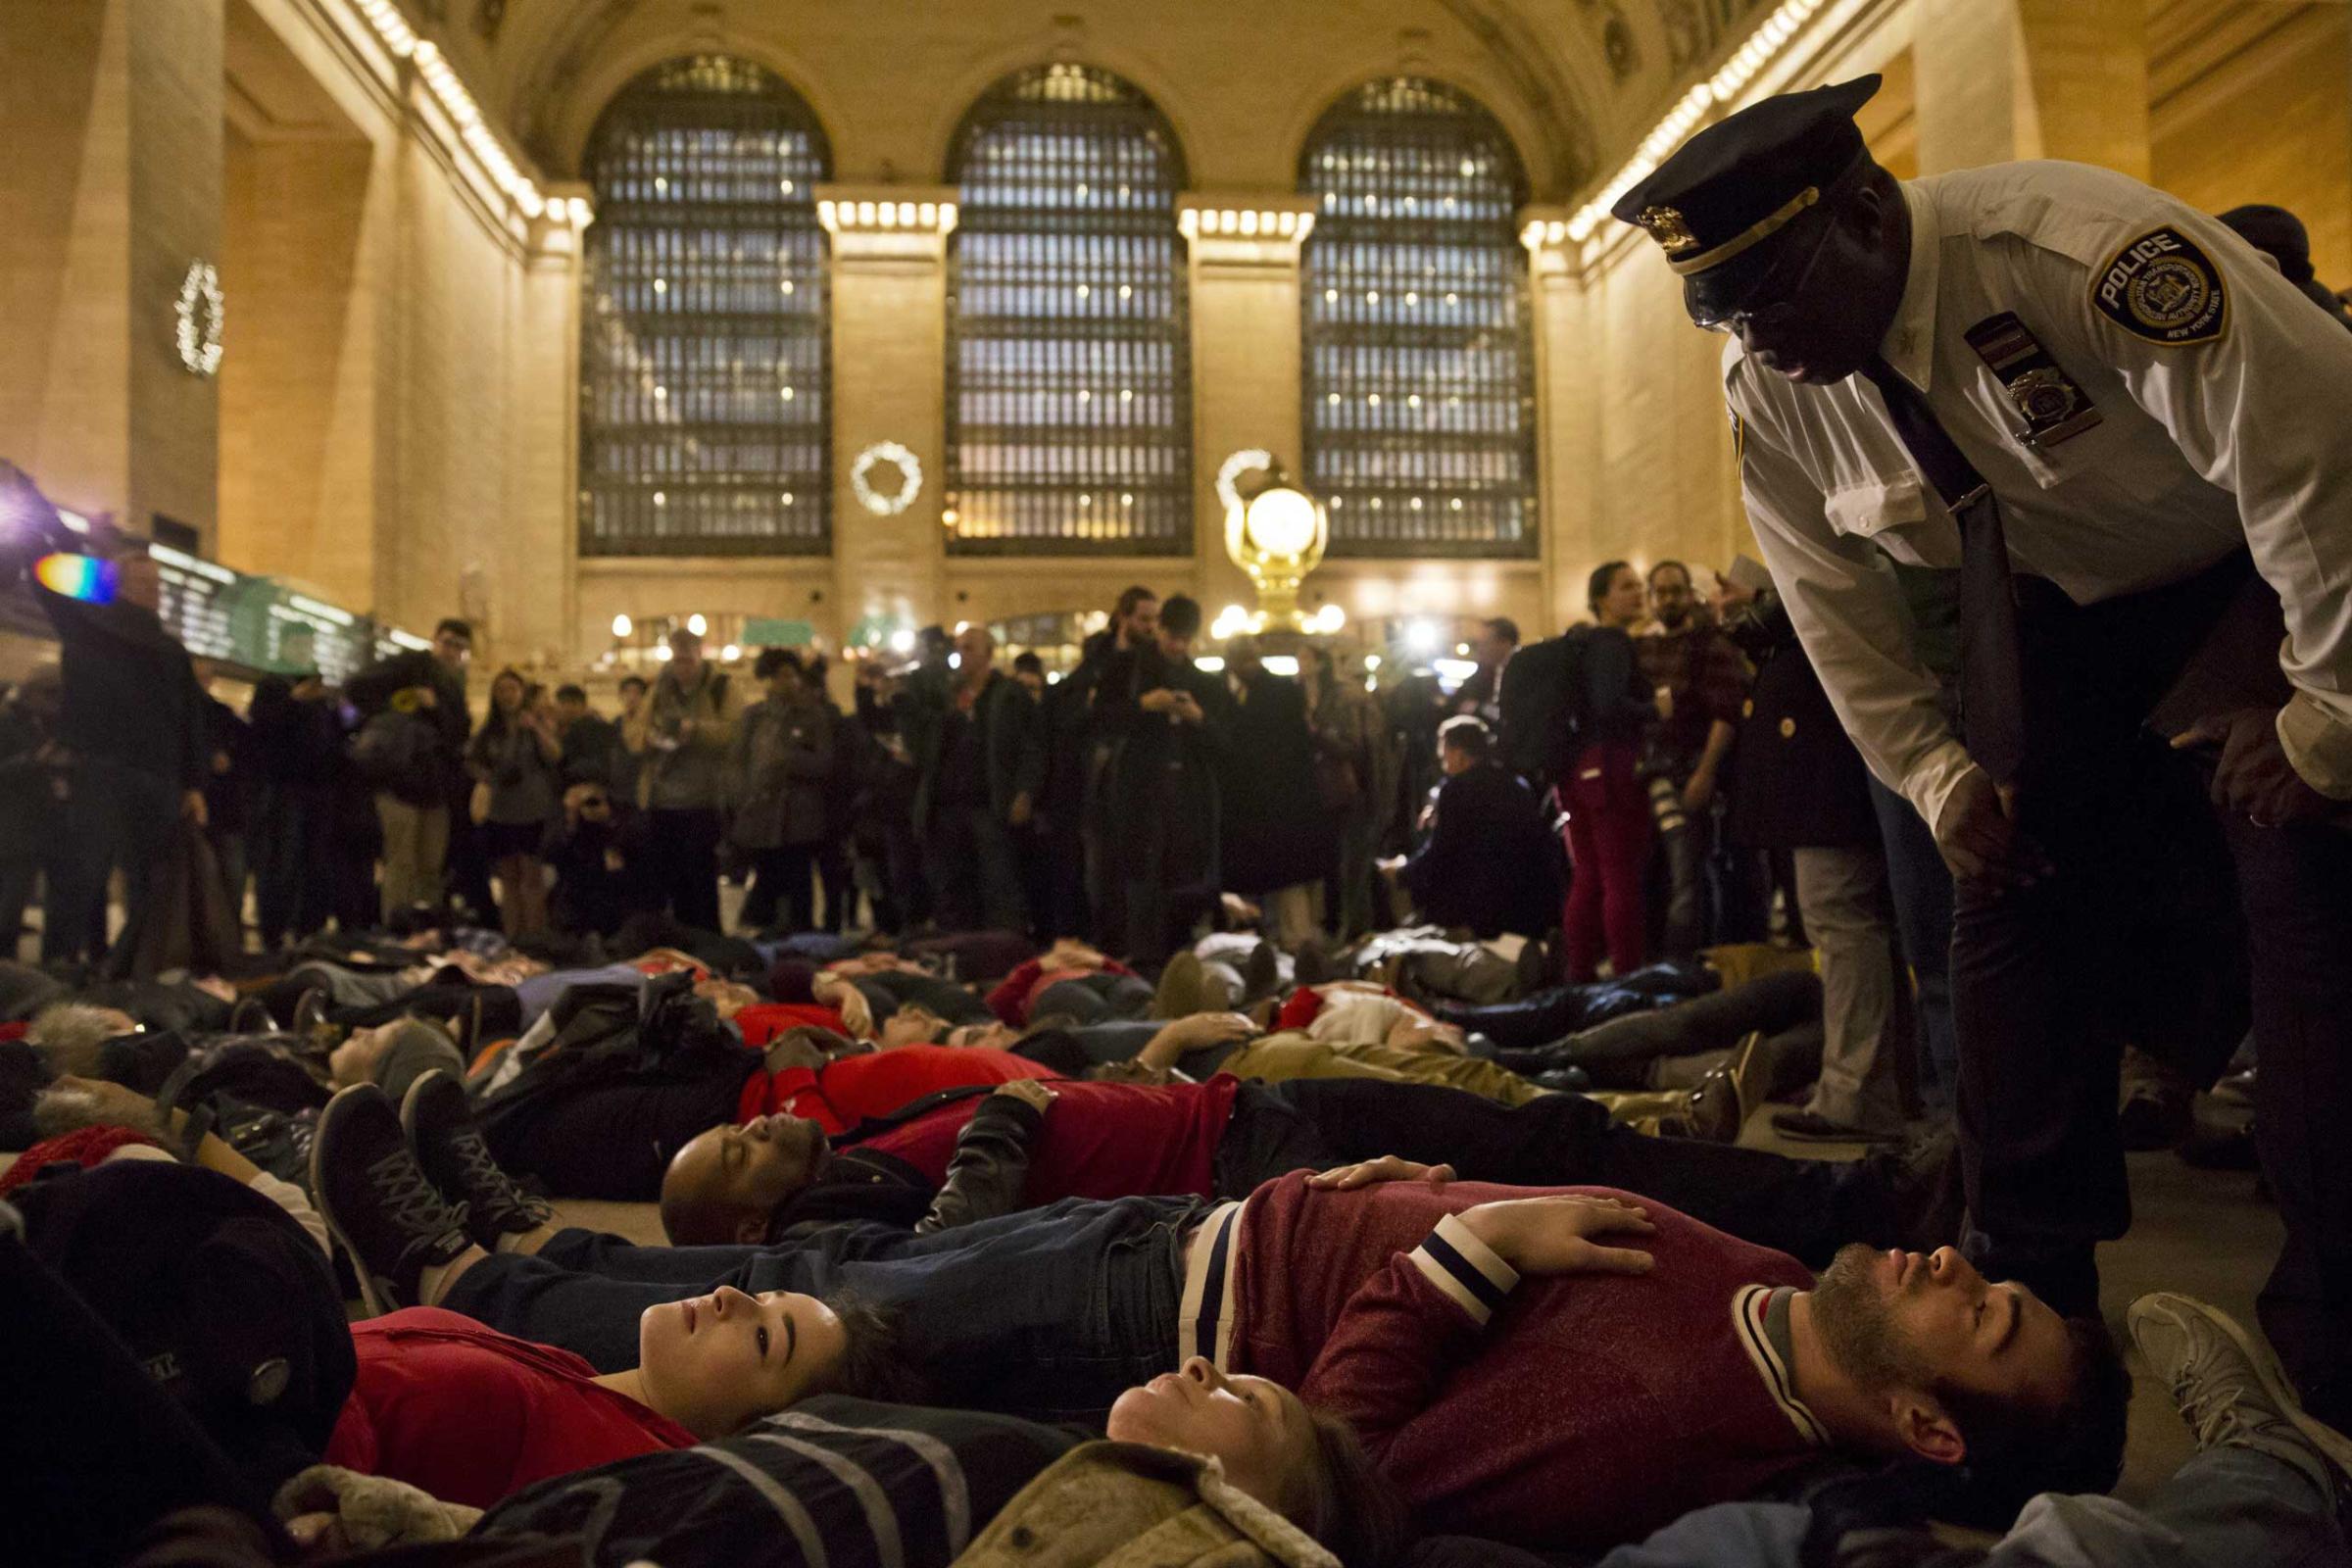 United States: Protests over the grand jury's decision not to bring charges in the death of Eric Garner A 'die-in' in New York's Grand Central Terminal, Dec. 3, 2014.